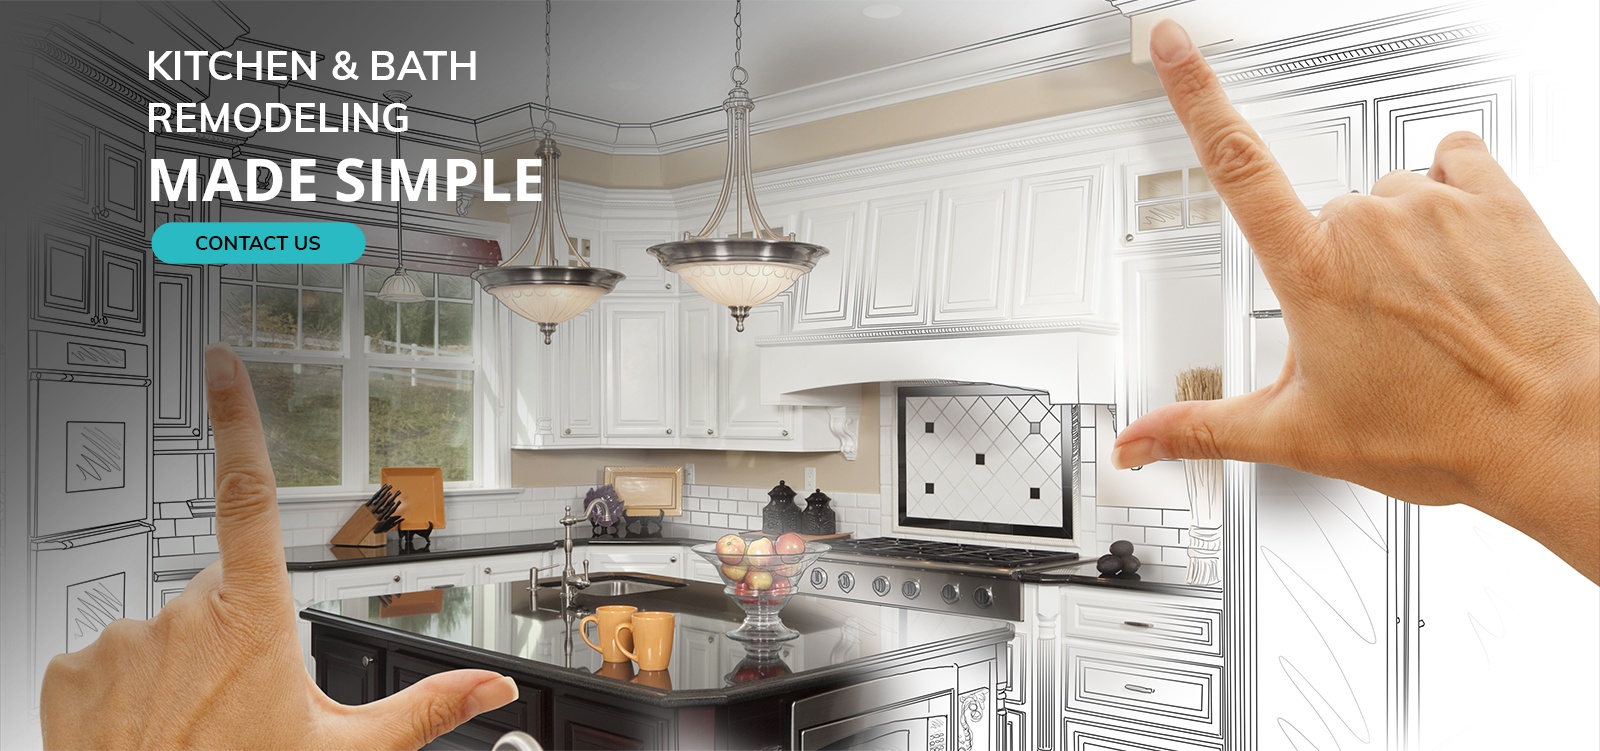 Kitchen and Bath Remodeling Made Simple by Luxury Kitchen Bath Express  